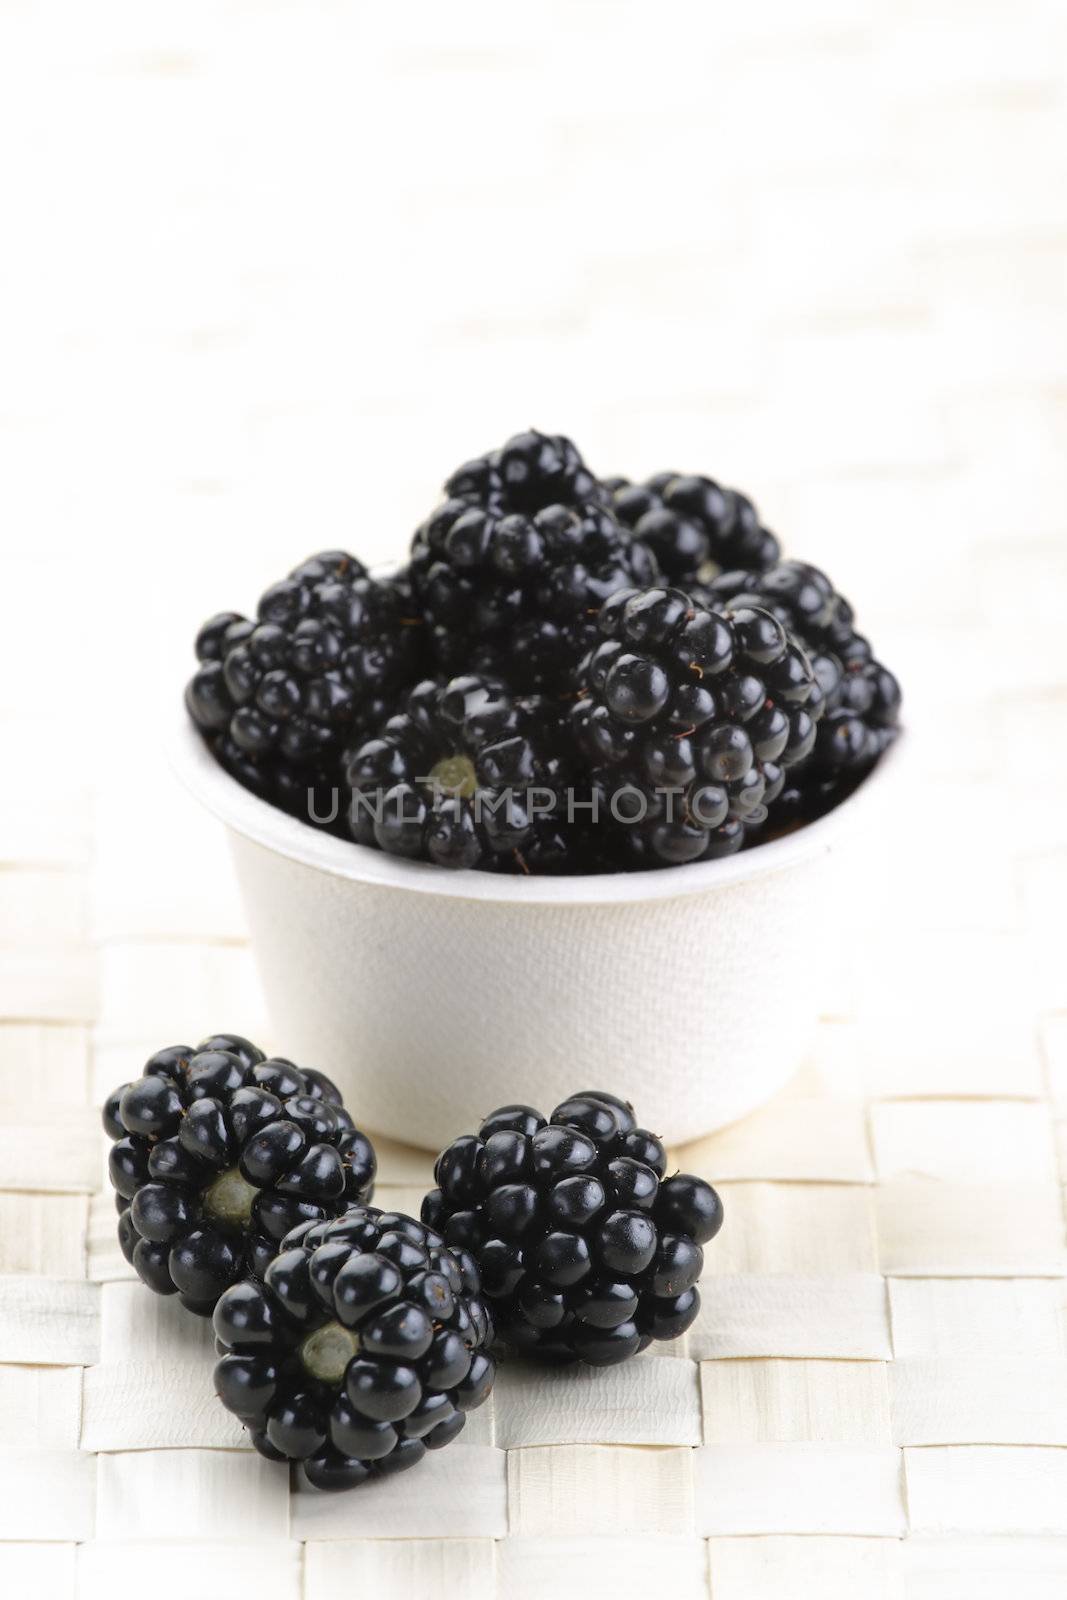 Fresh picked organic blackberries in a recyclable bowl.